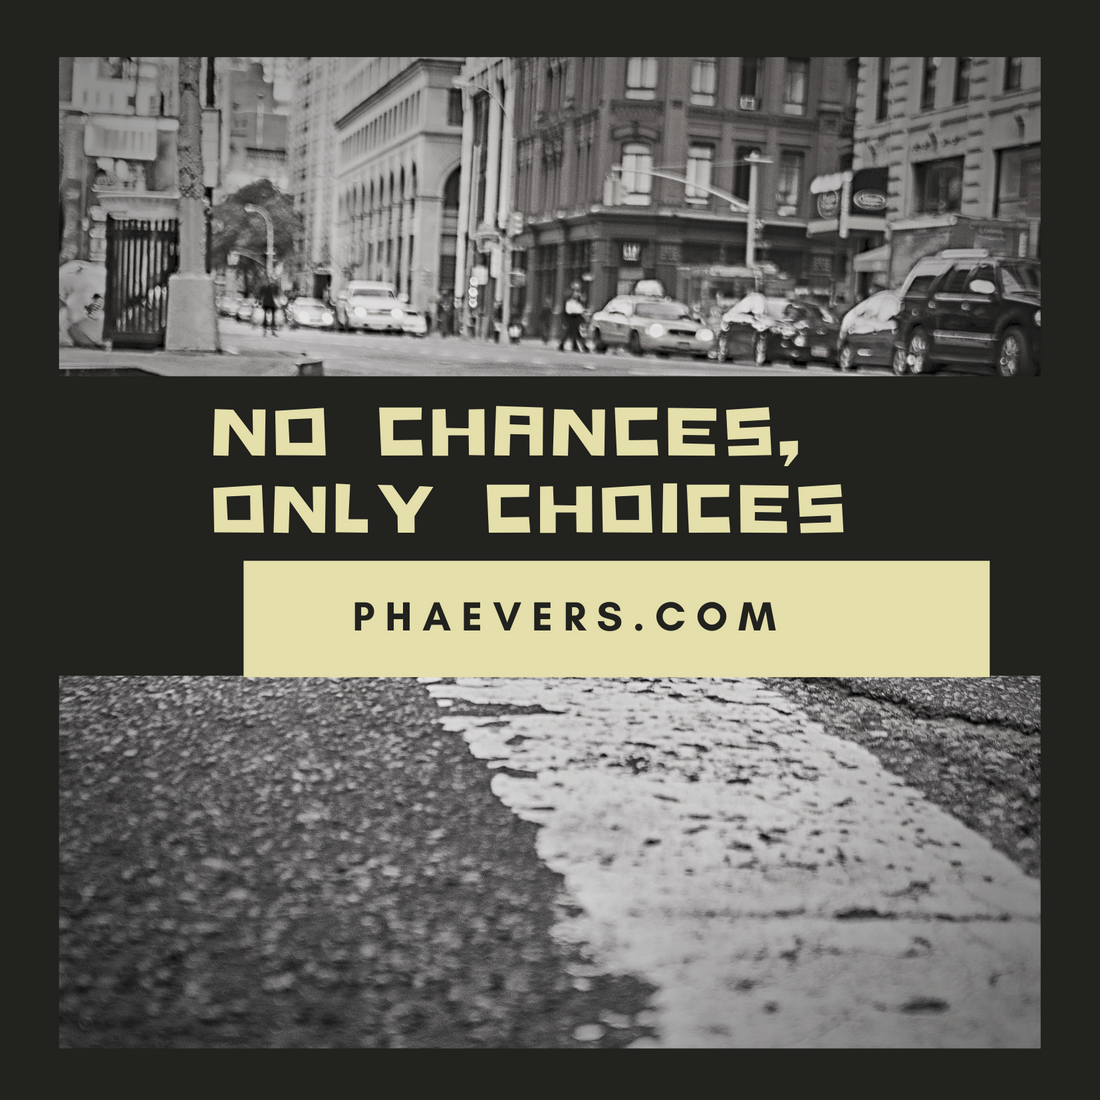 No chances, only choices